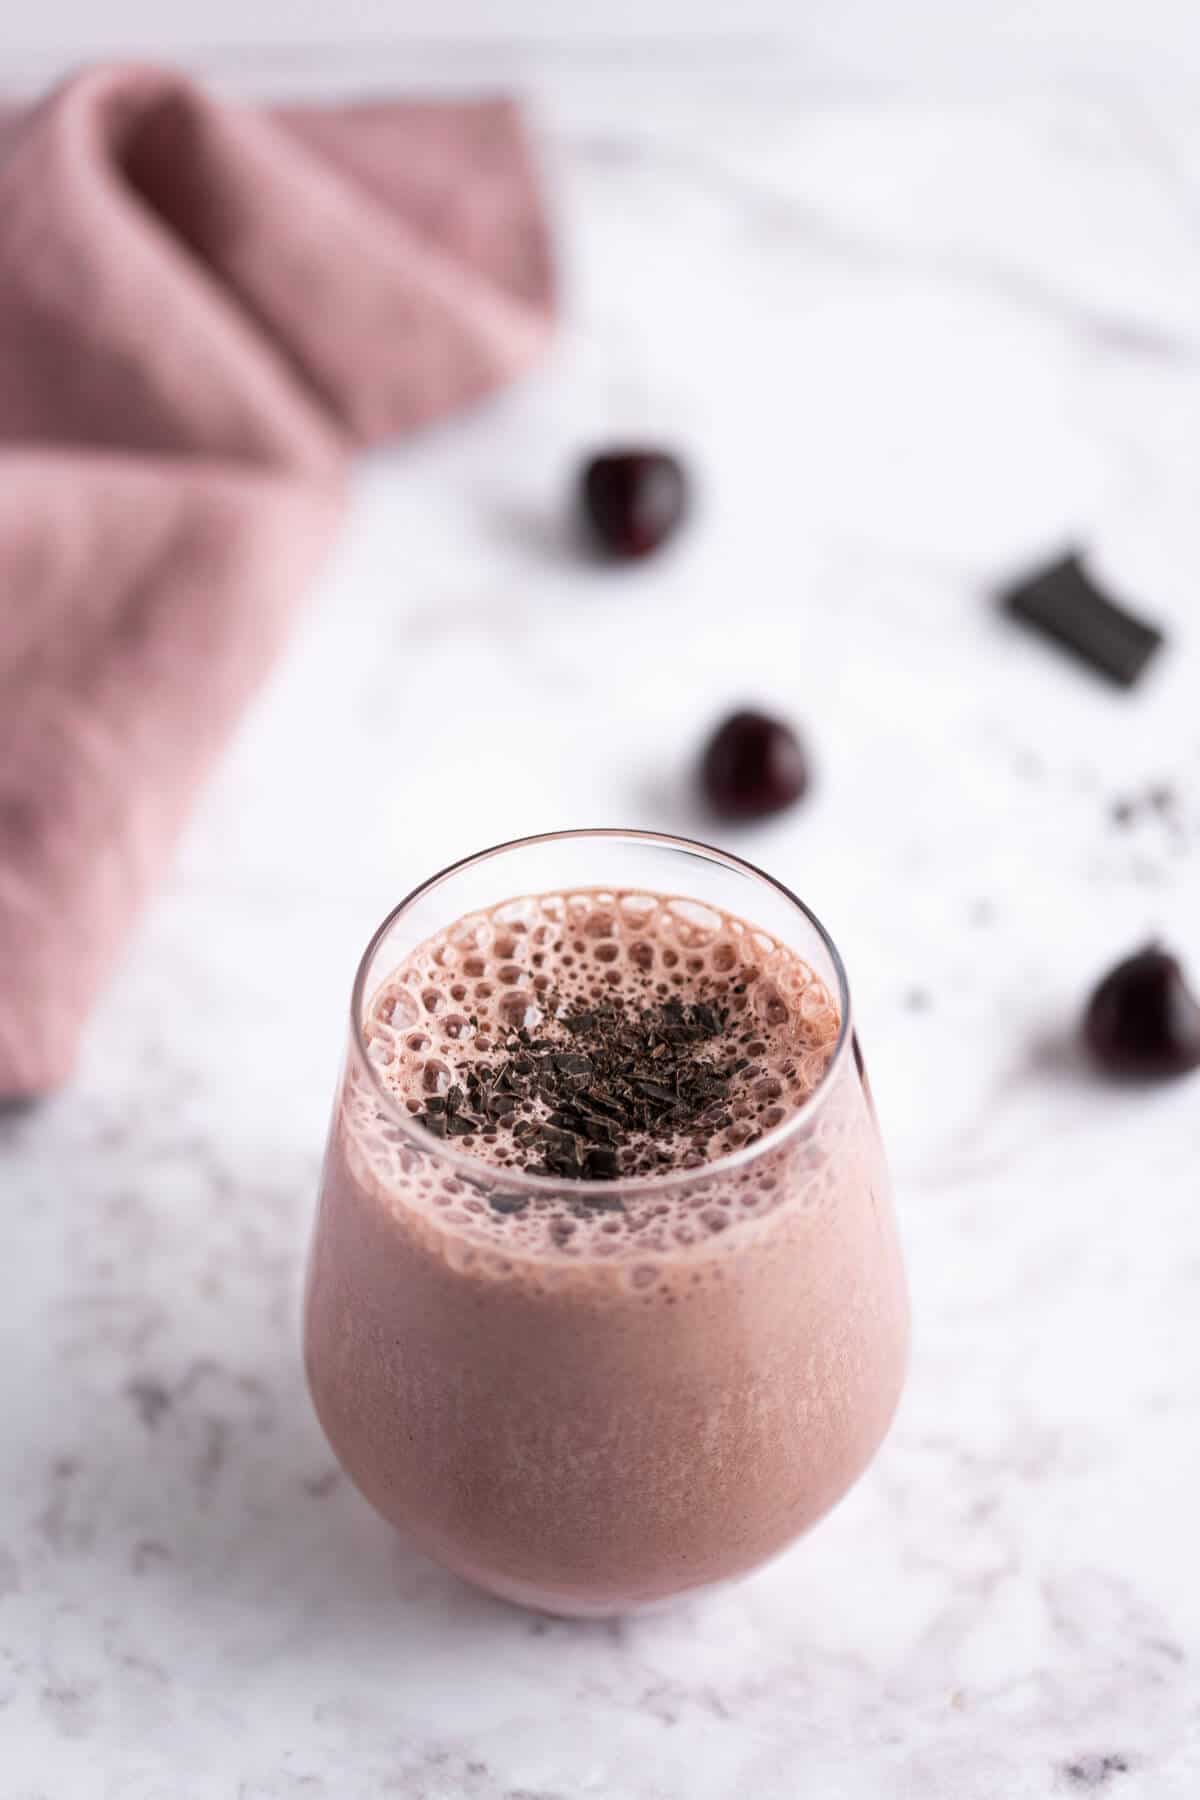 Full glass of Chocolate Cherry Smoothie with a frothy top and garnished with shaved dark chocolate.